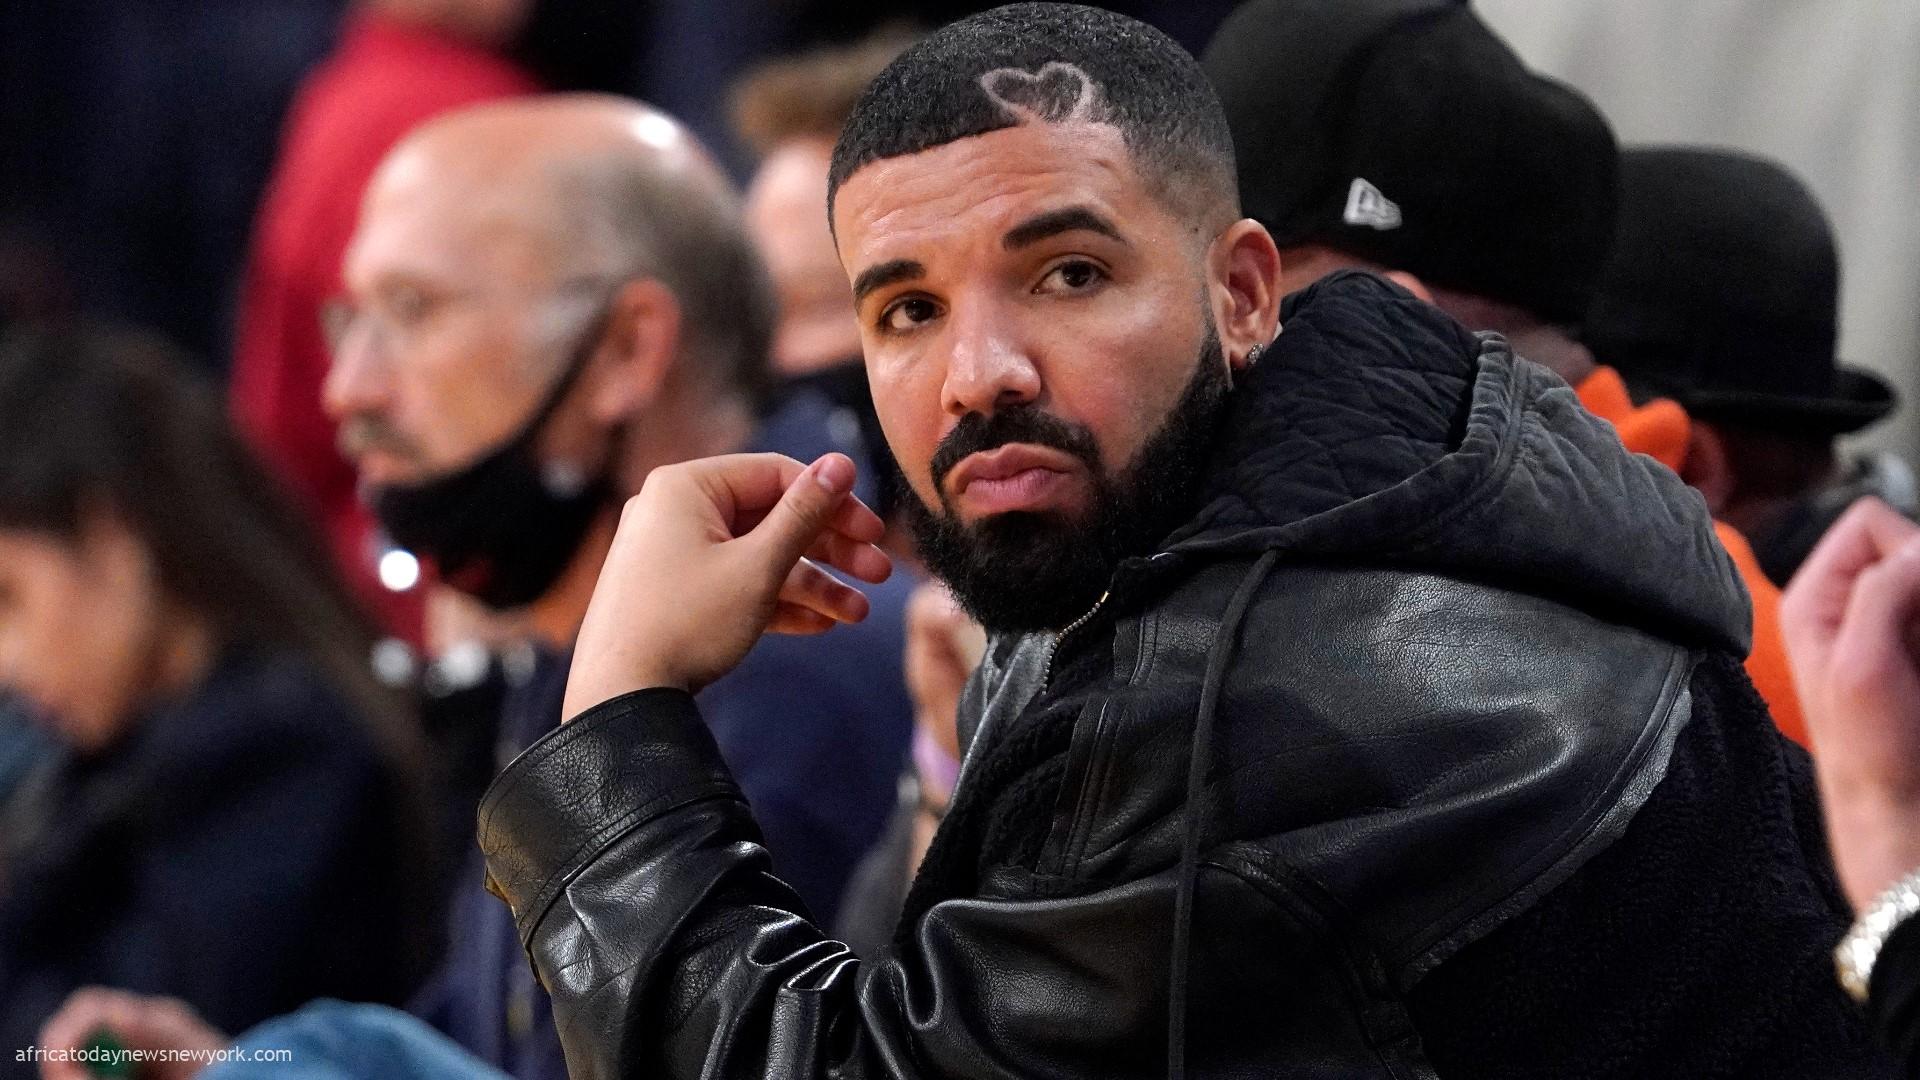 Drake Announces Break From Music Cites Health Issues